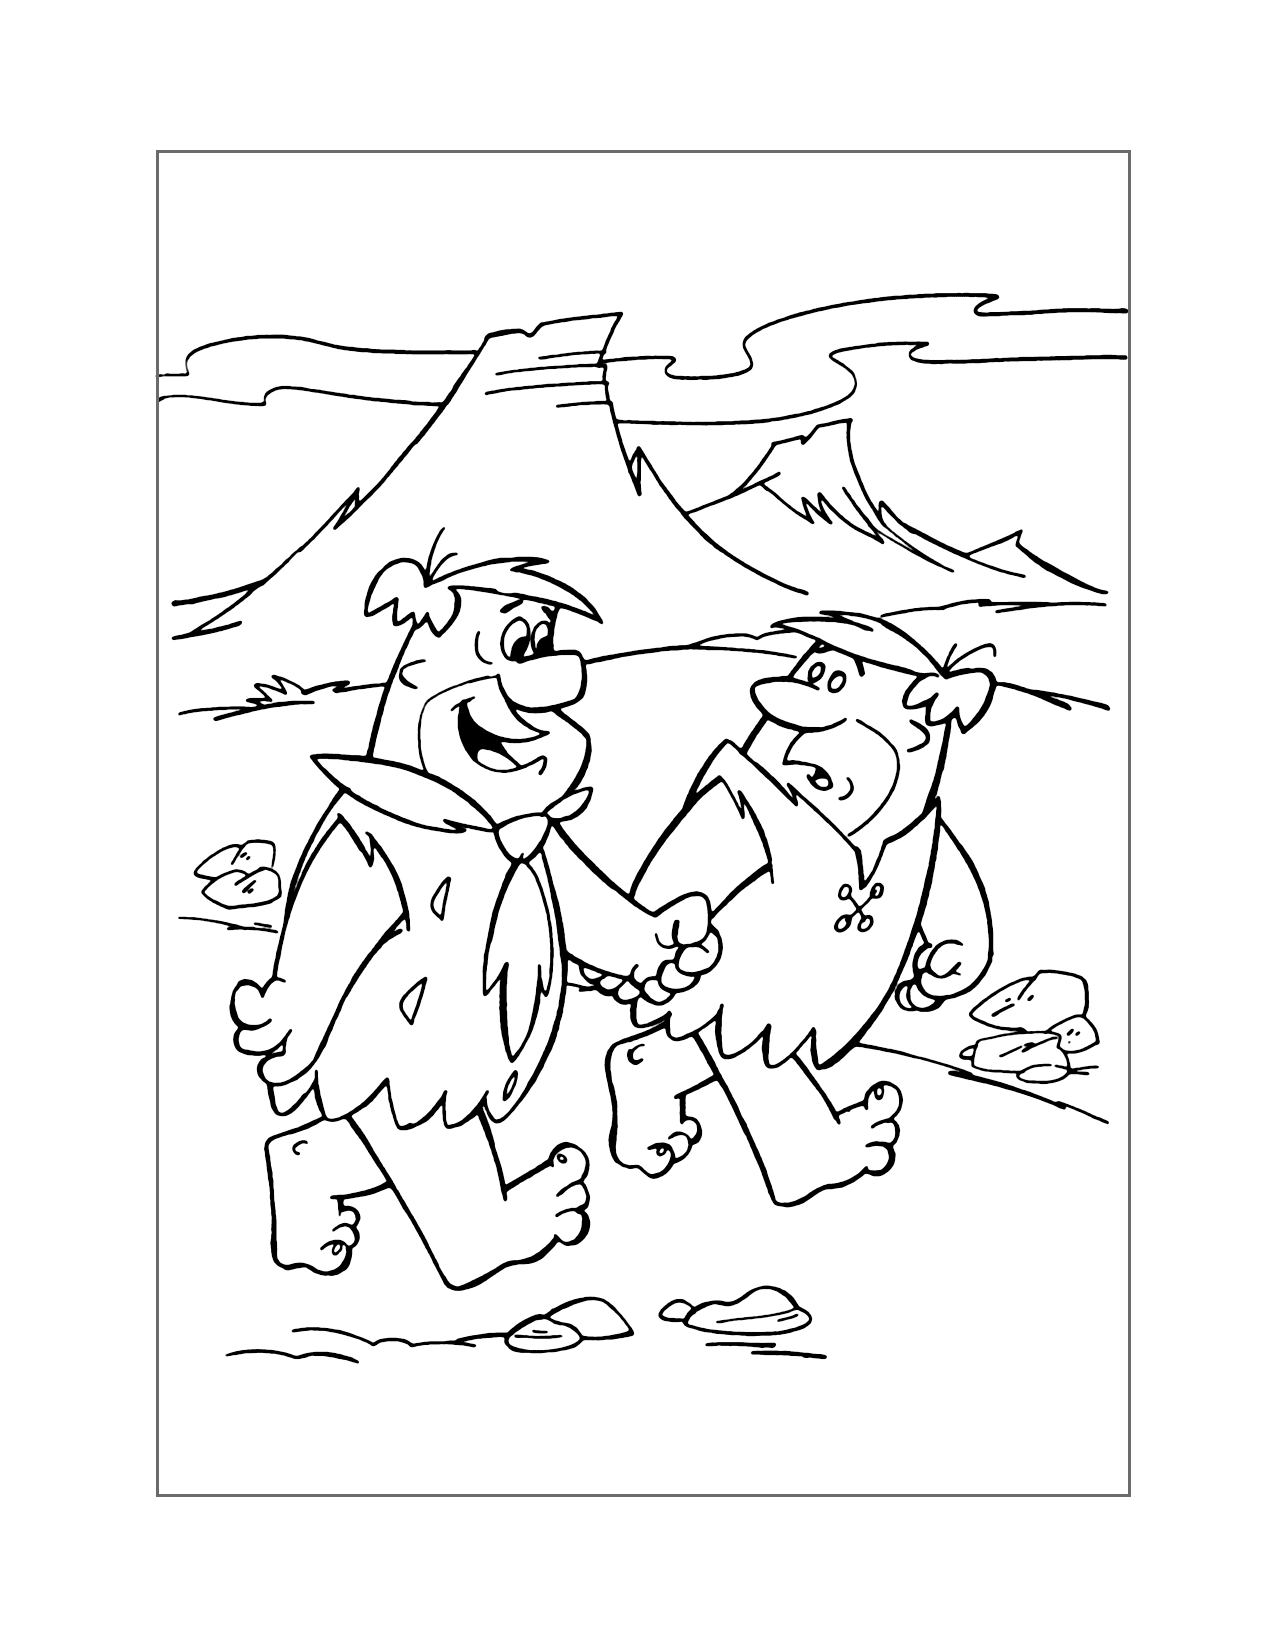 Fred Flinstone And Barney Rubble Coloring Page